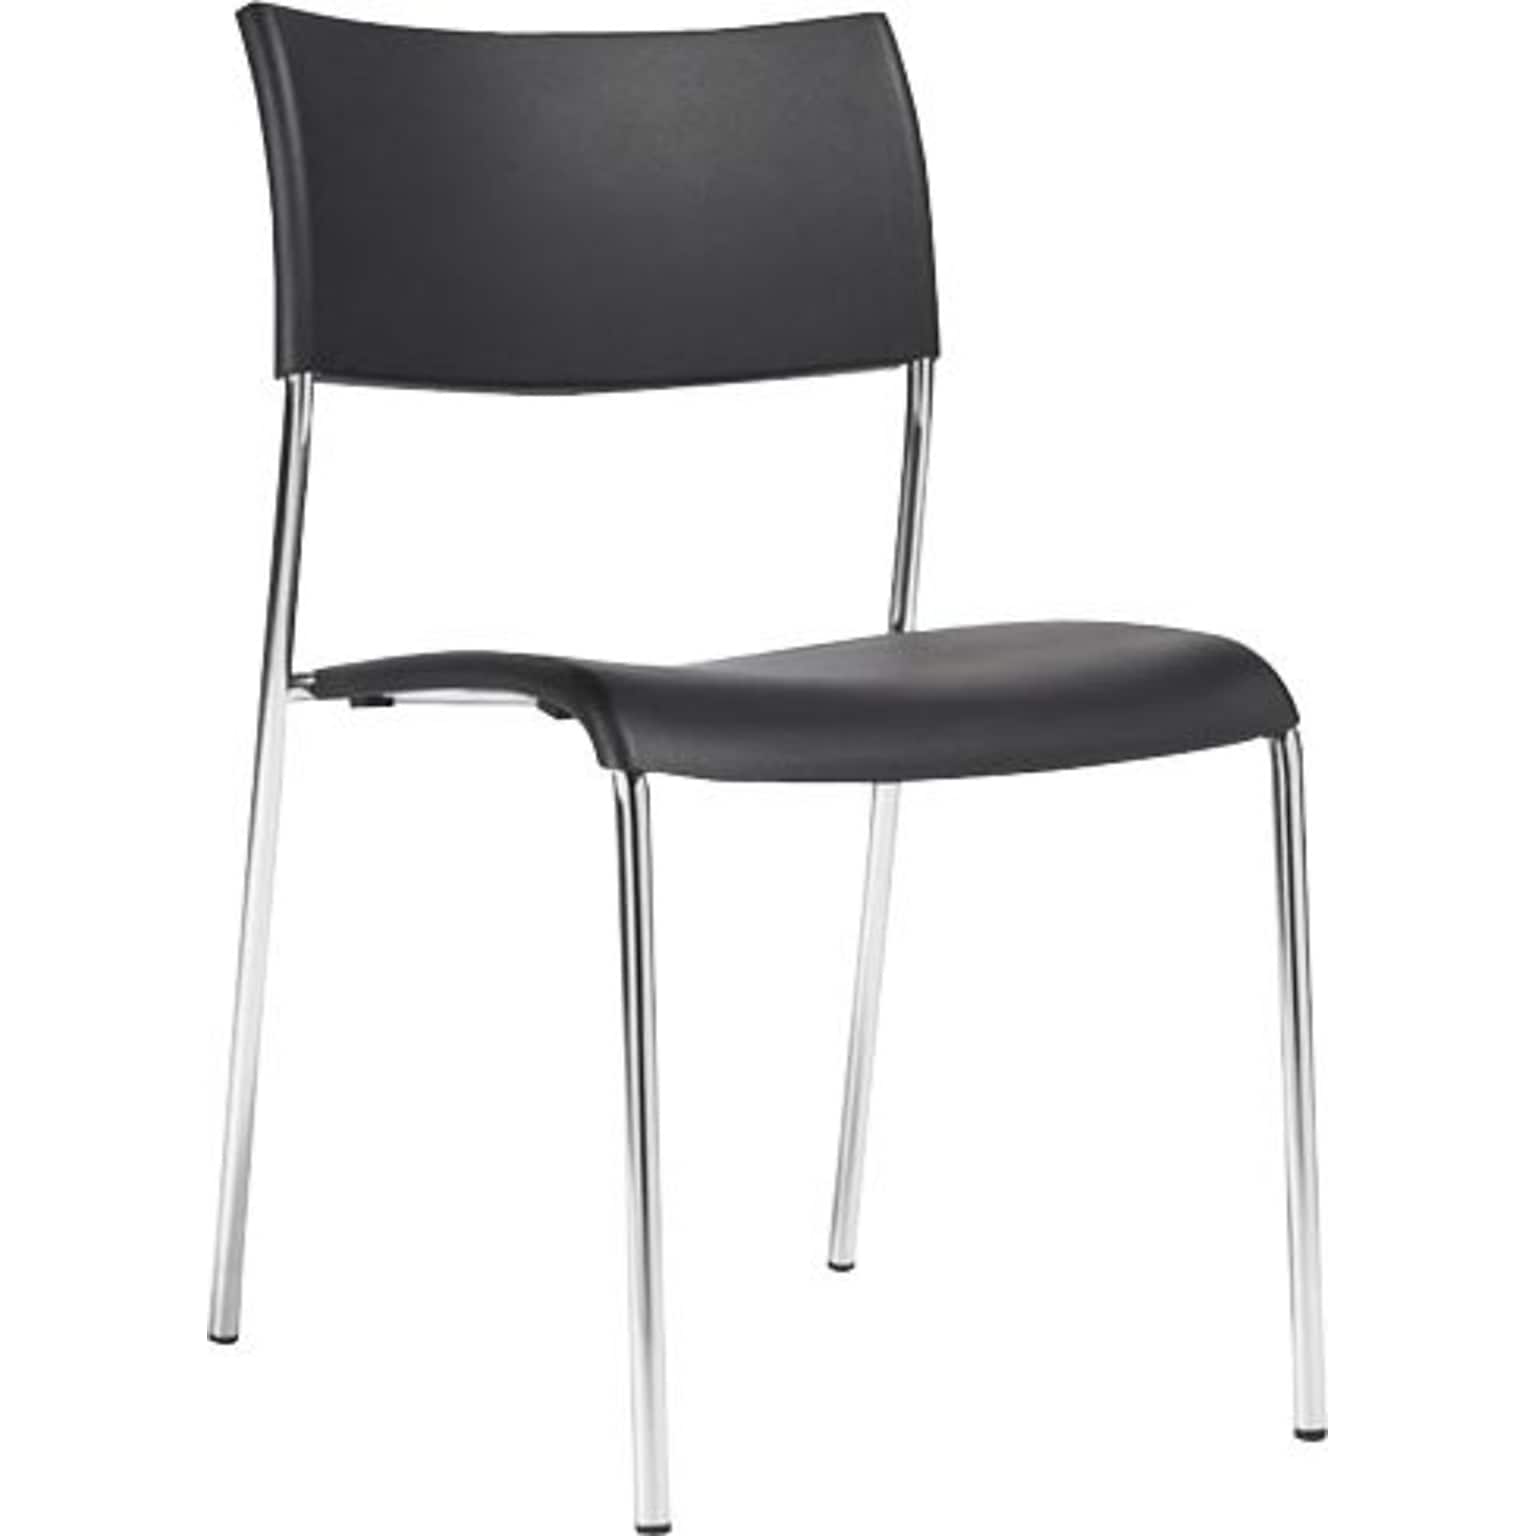 Offices To Go® Armless Stack Chair, Plastic, Black, Seat: 16.5Wx16D, Back: 17.5Wx14.5H, 4/CT